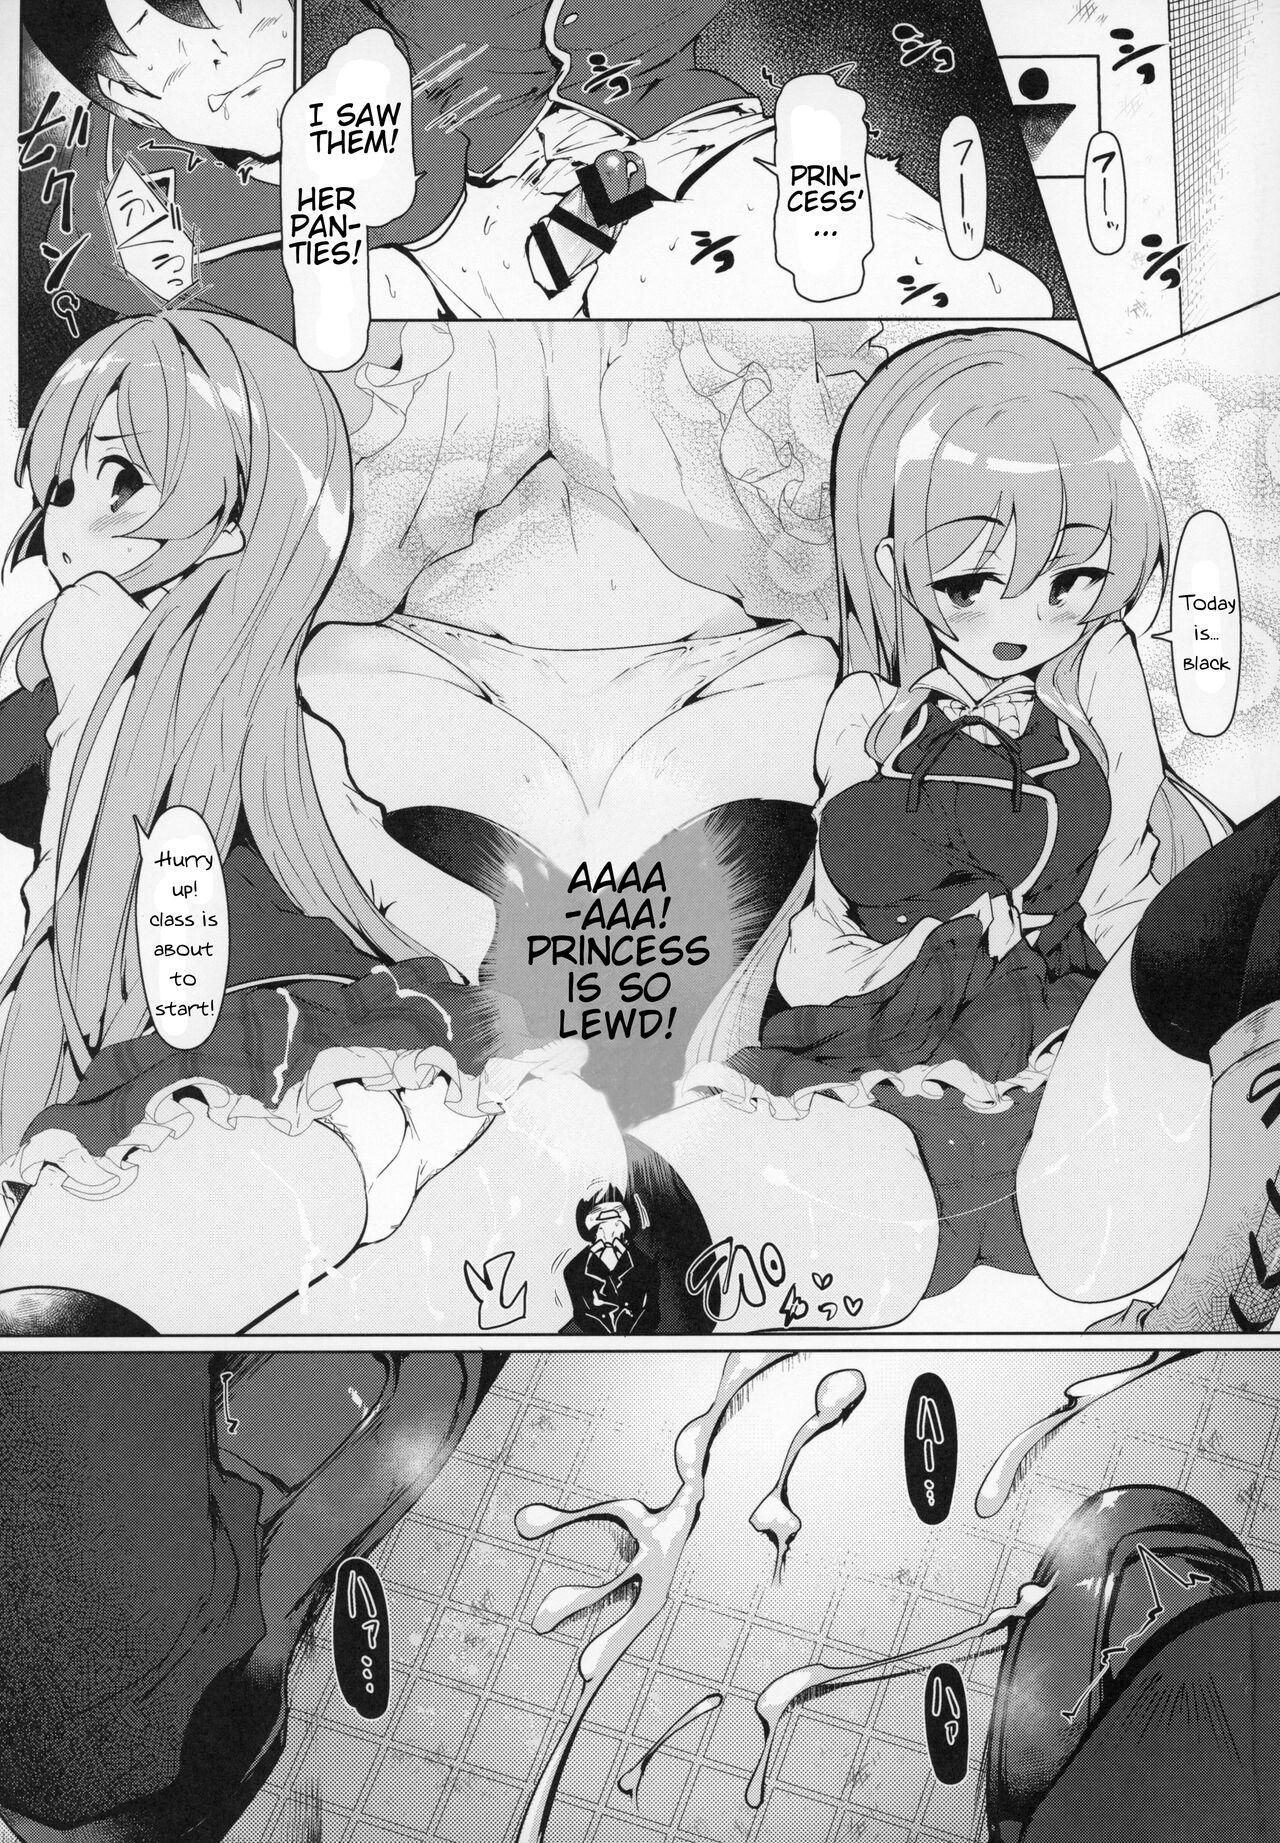 Youporn There's No Way An Ecchi Event Will Happen Between Me and the Princess of Manaria Kingdom! - Manaria friends Cocksucker - Page 6